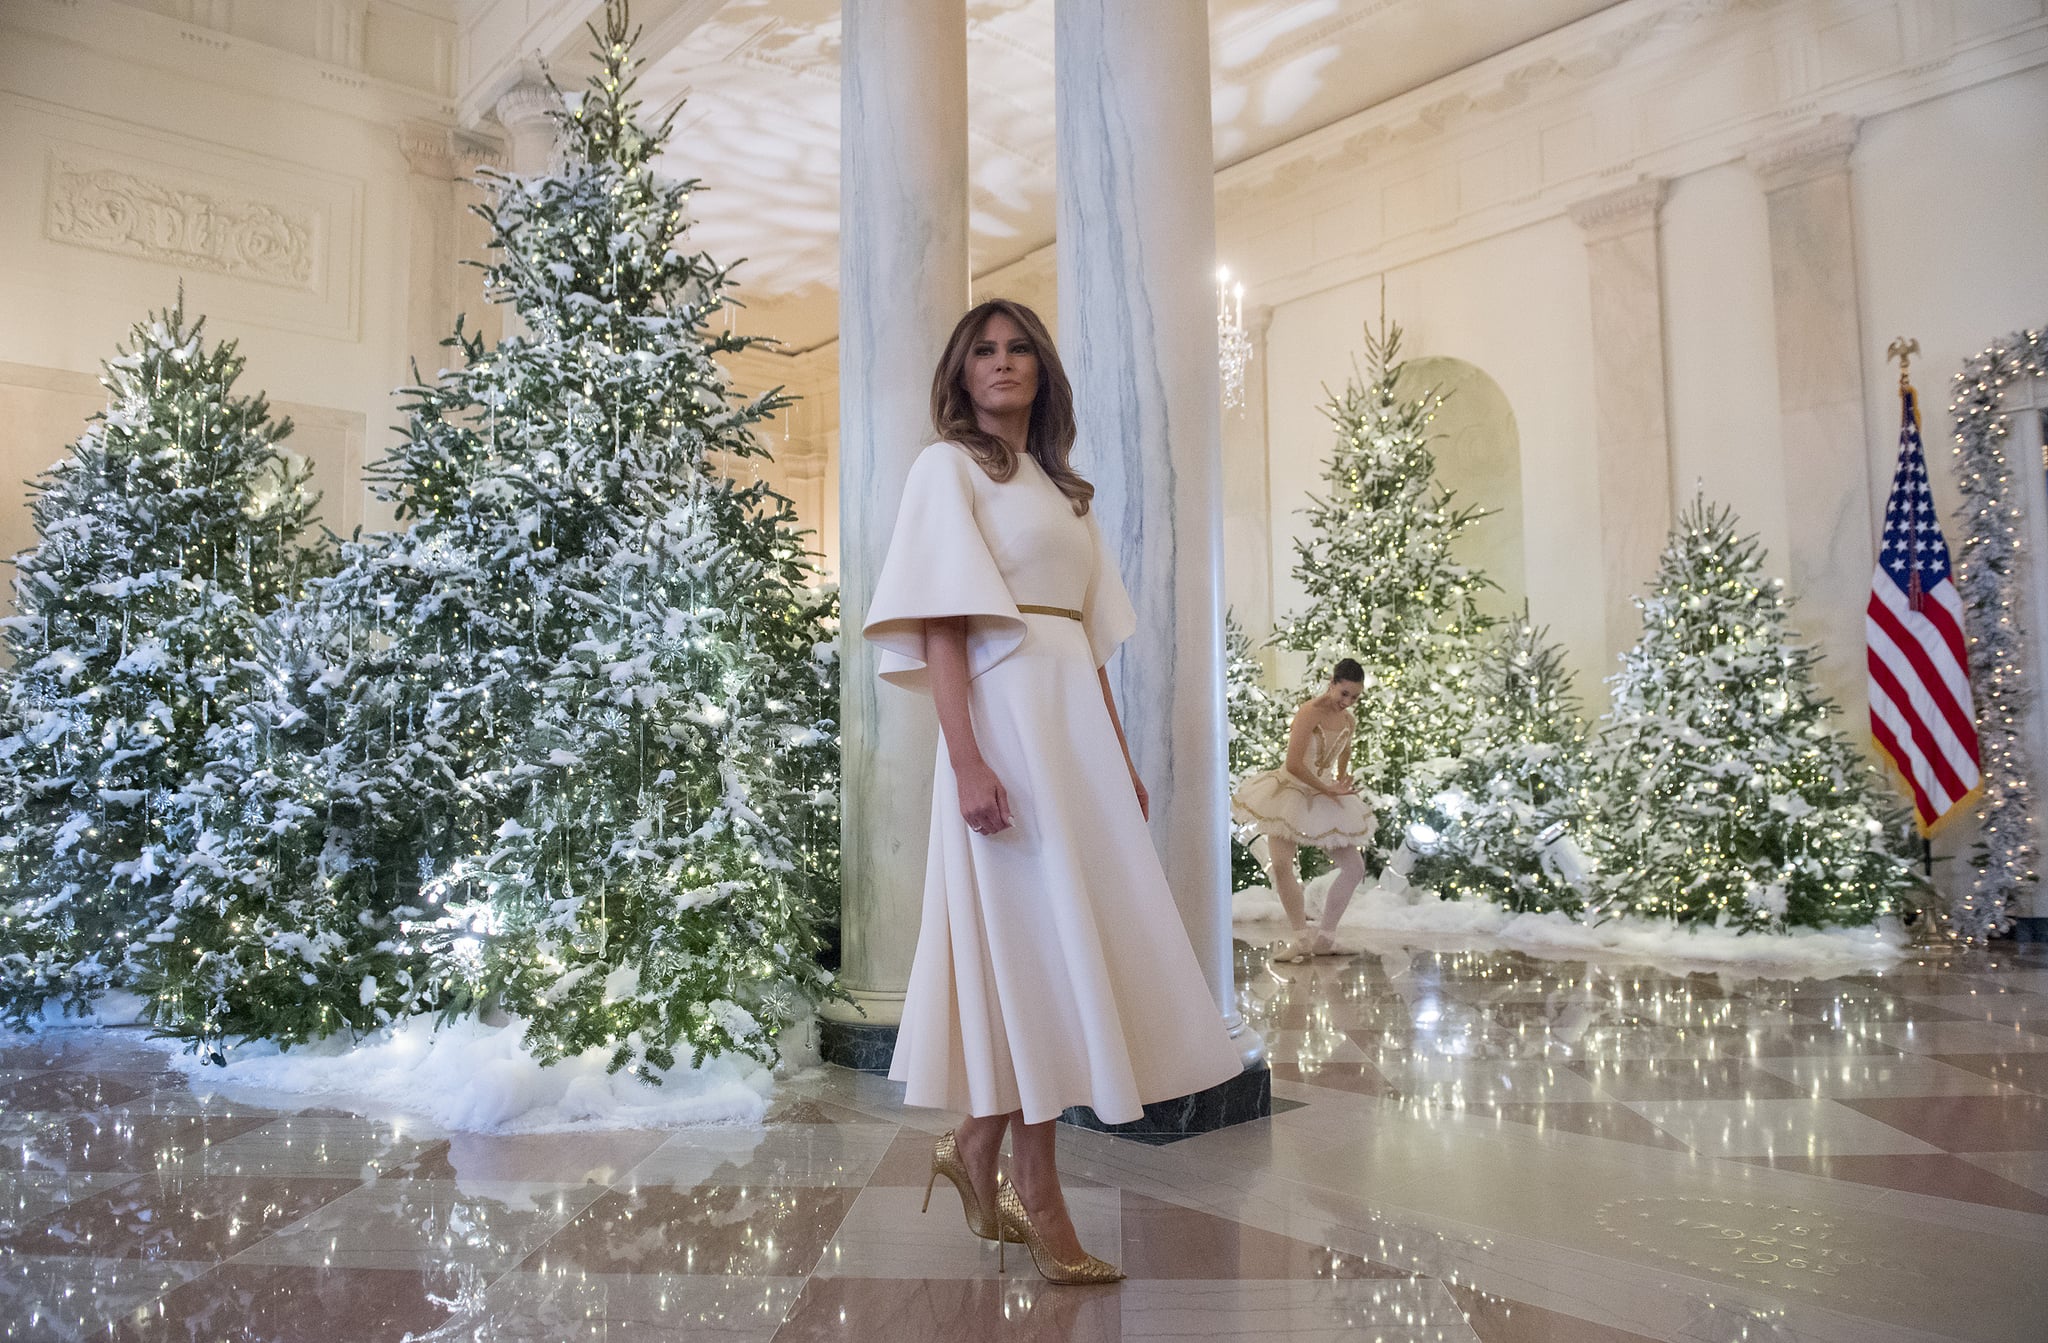 Melania Trump Presents the White House Christmas Decorations in Dior